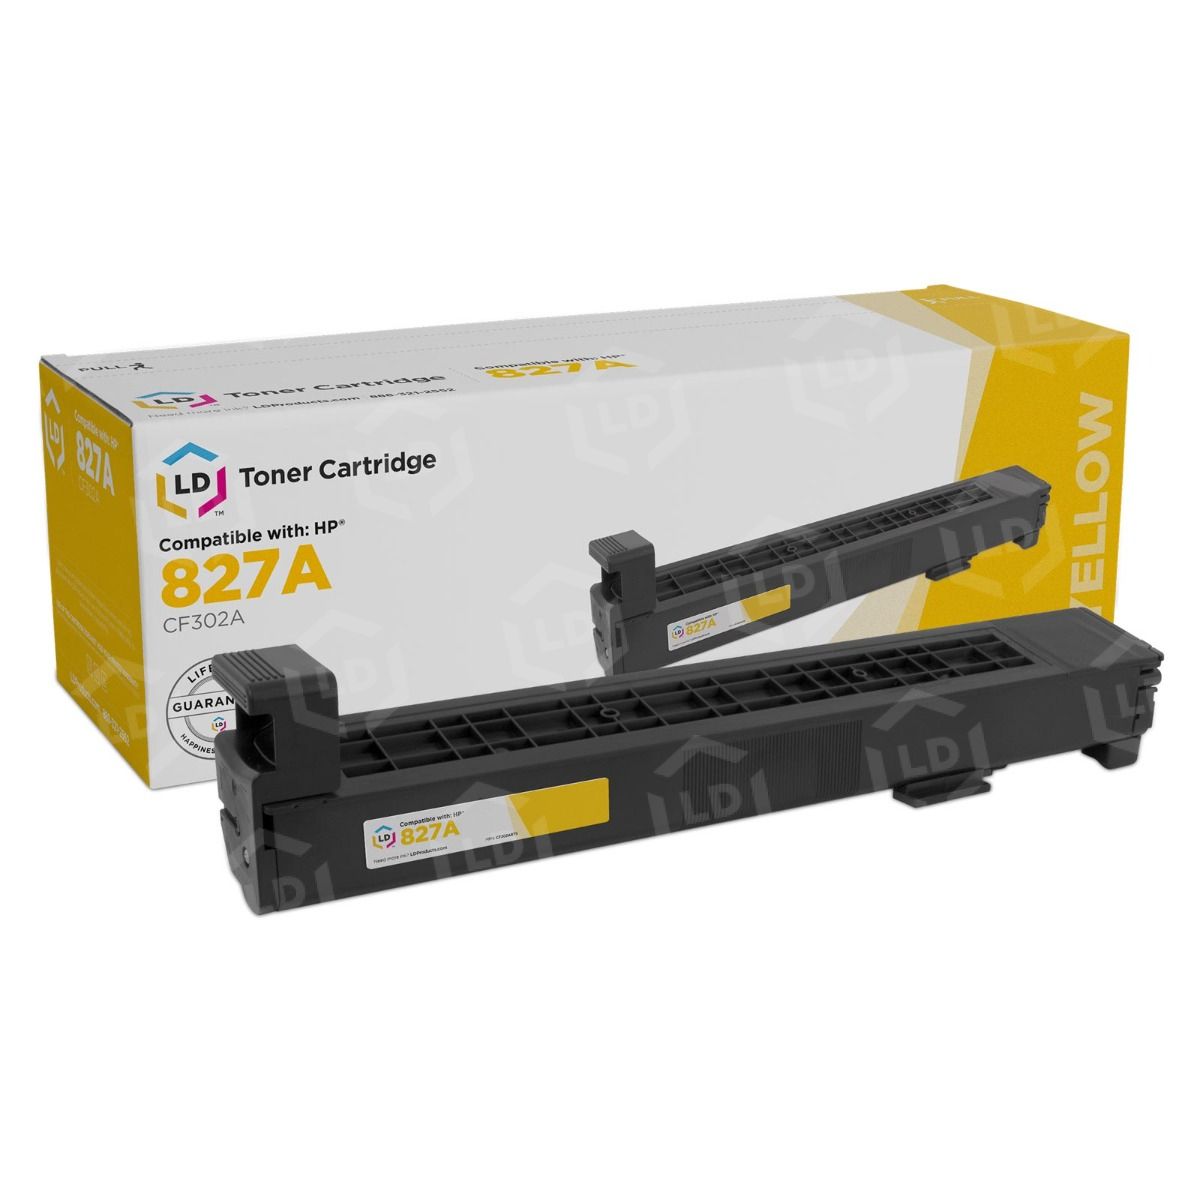 HP 827A Yellow Toner CF302A Low Price Compatible LD Products